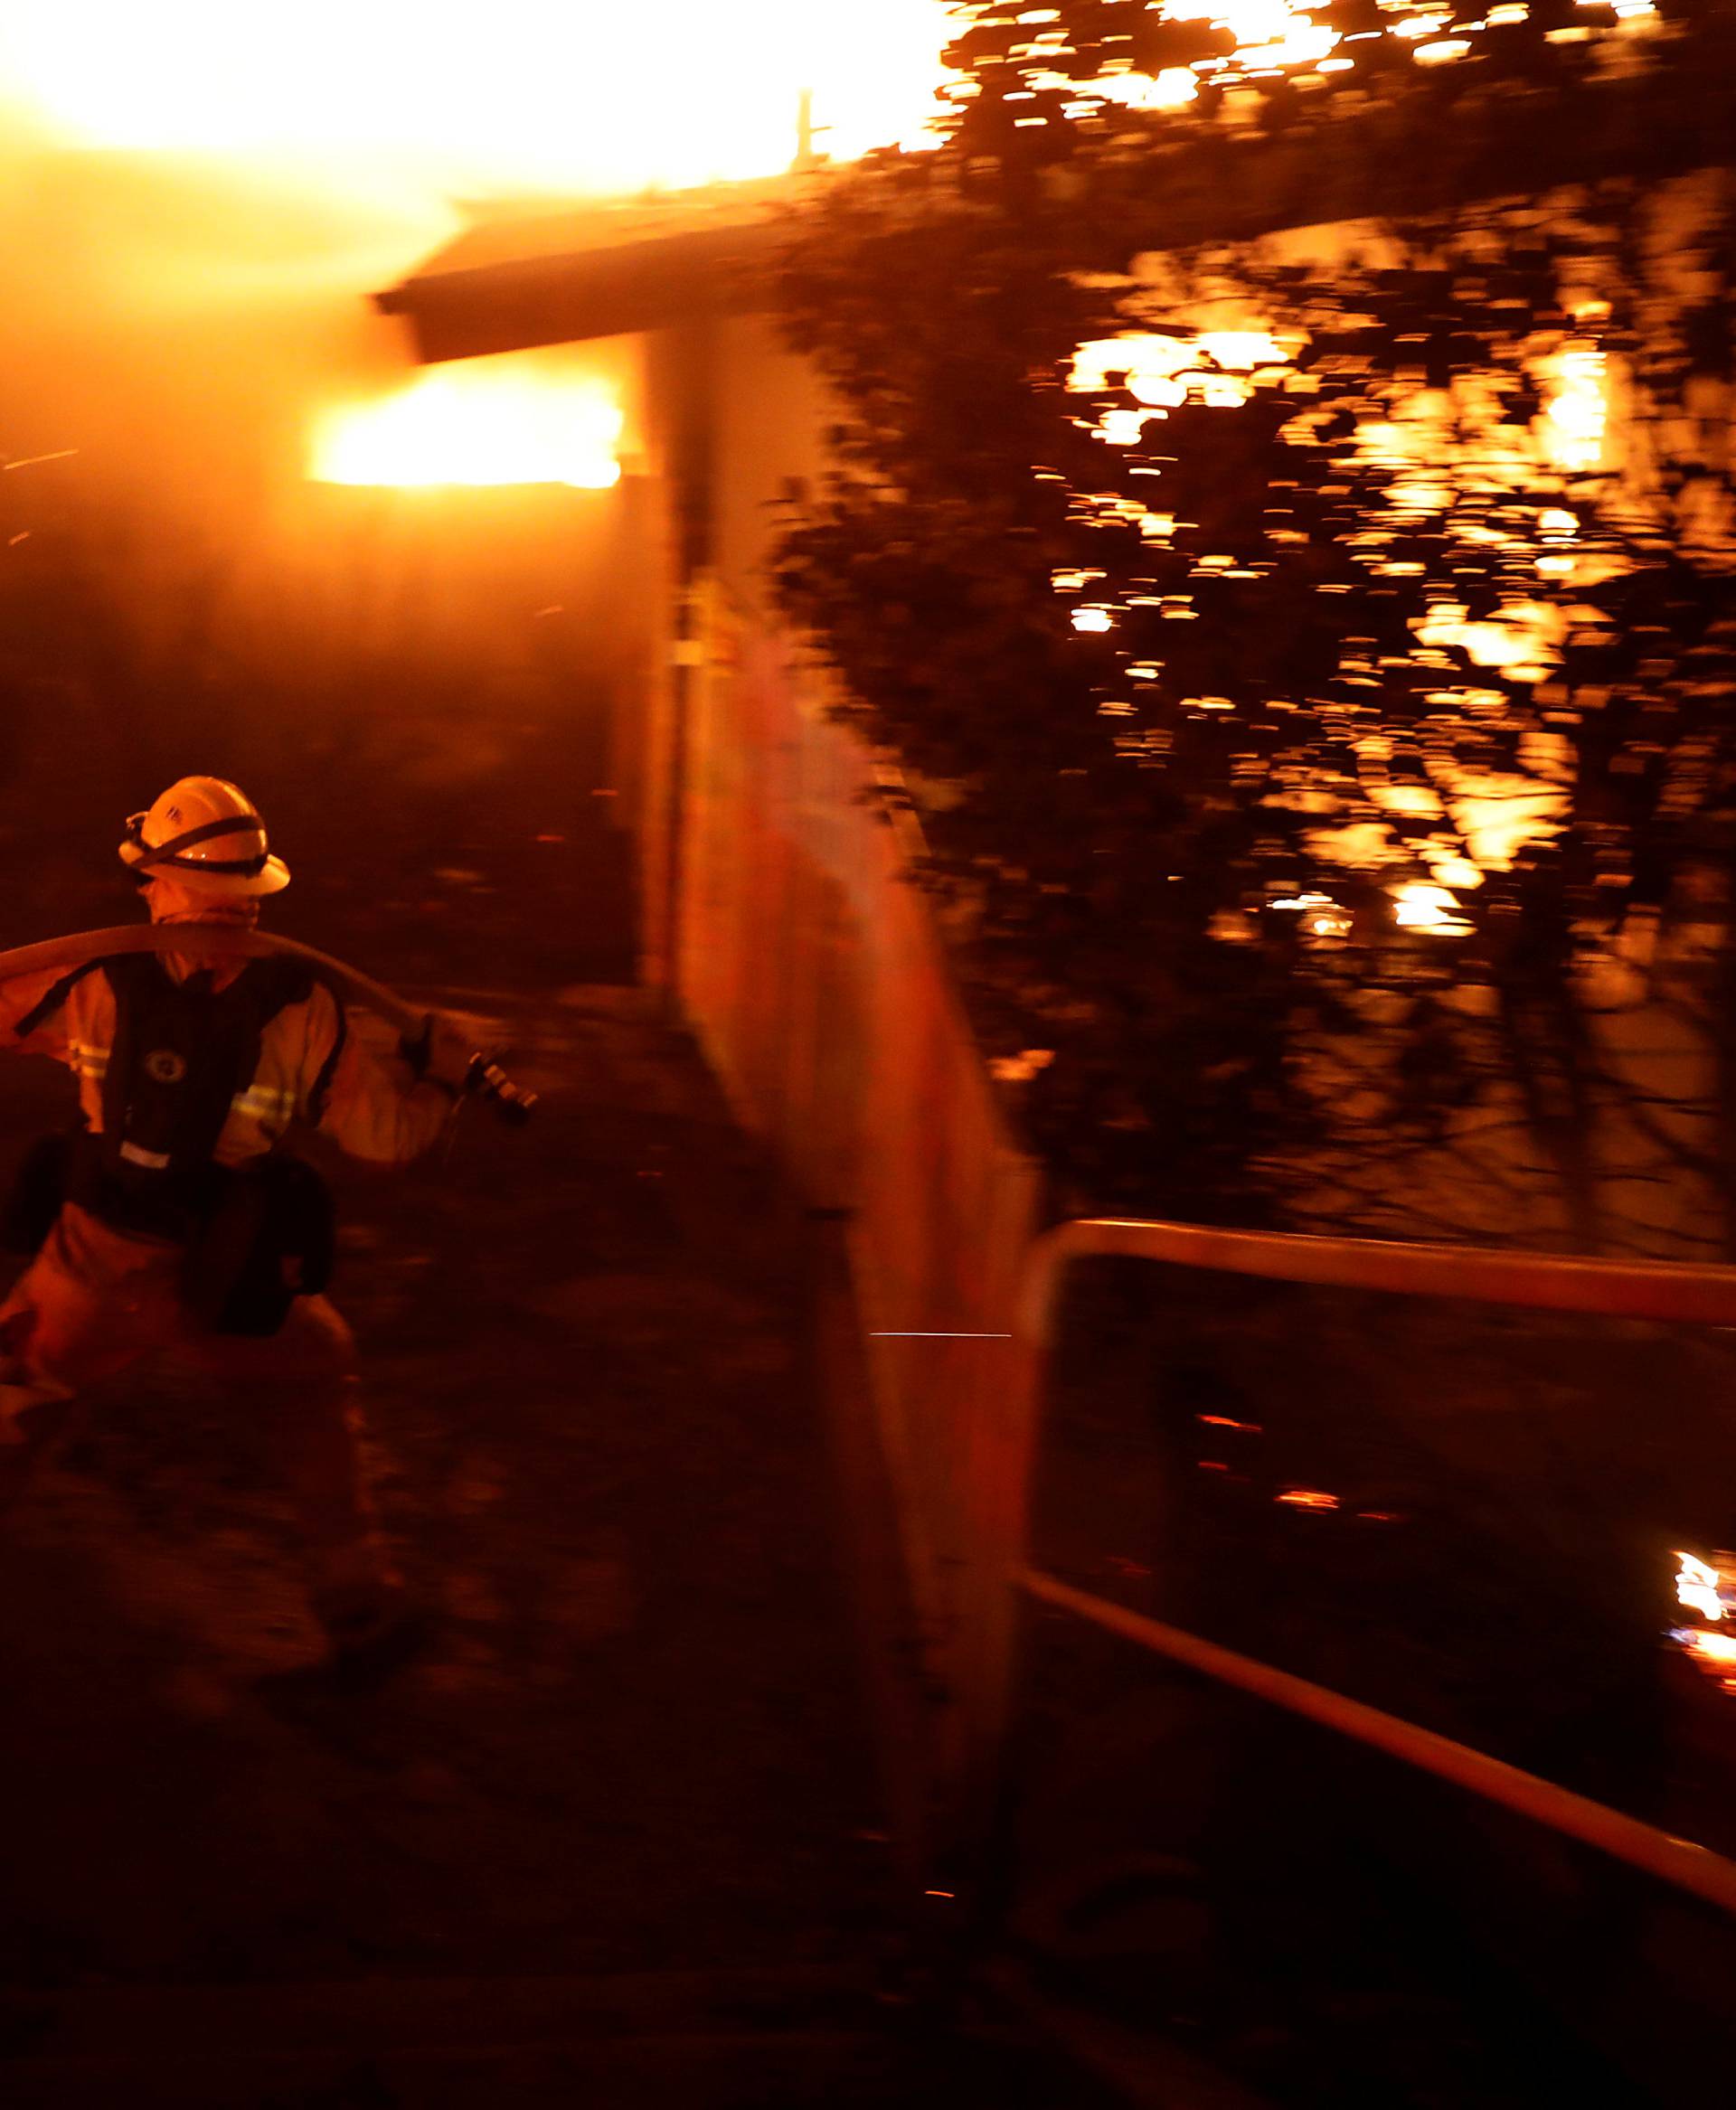 A firefighter drags a hose as he battles the Camp Fire in Paradise